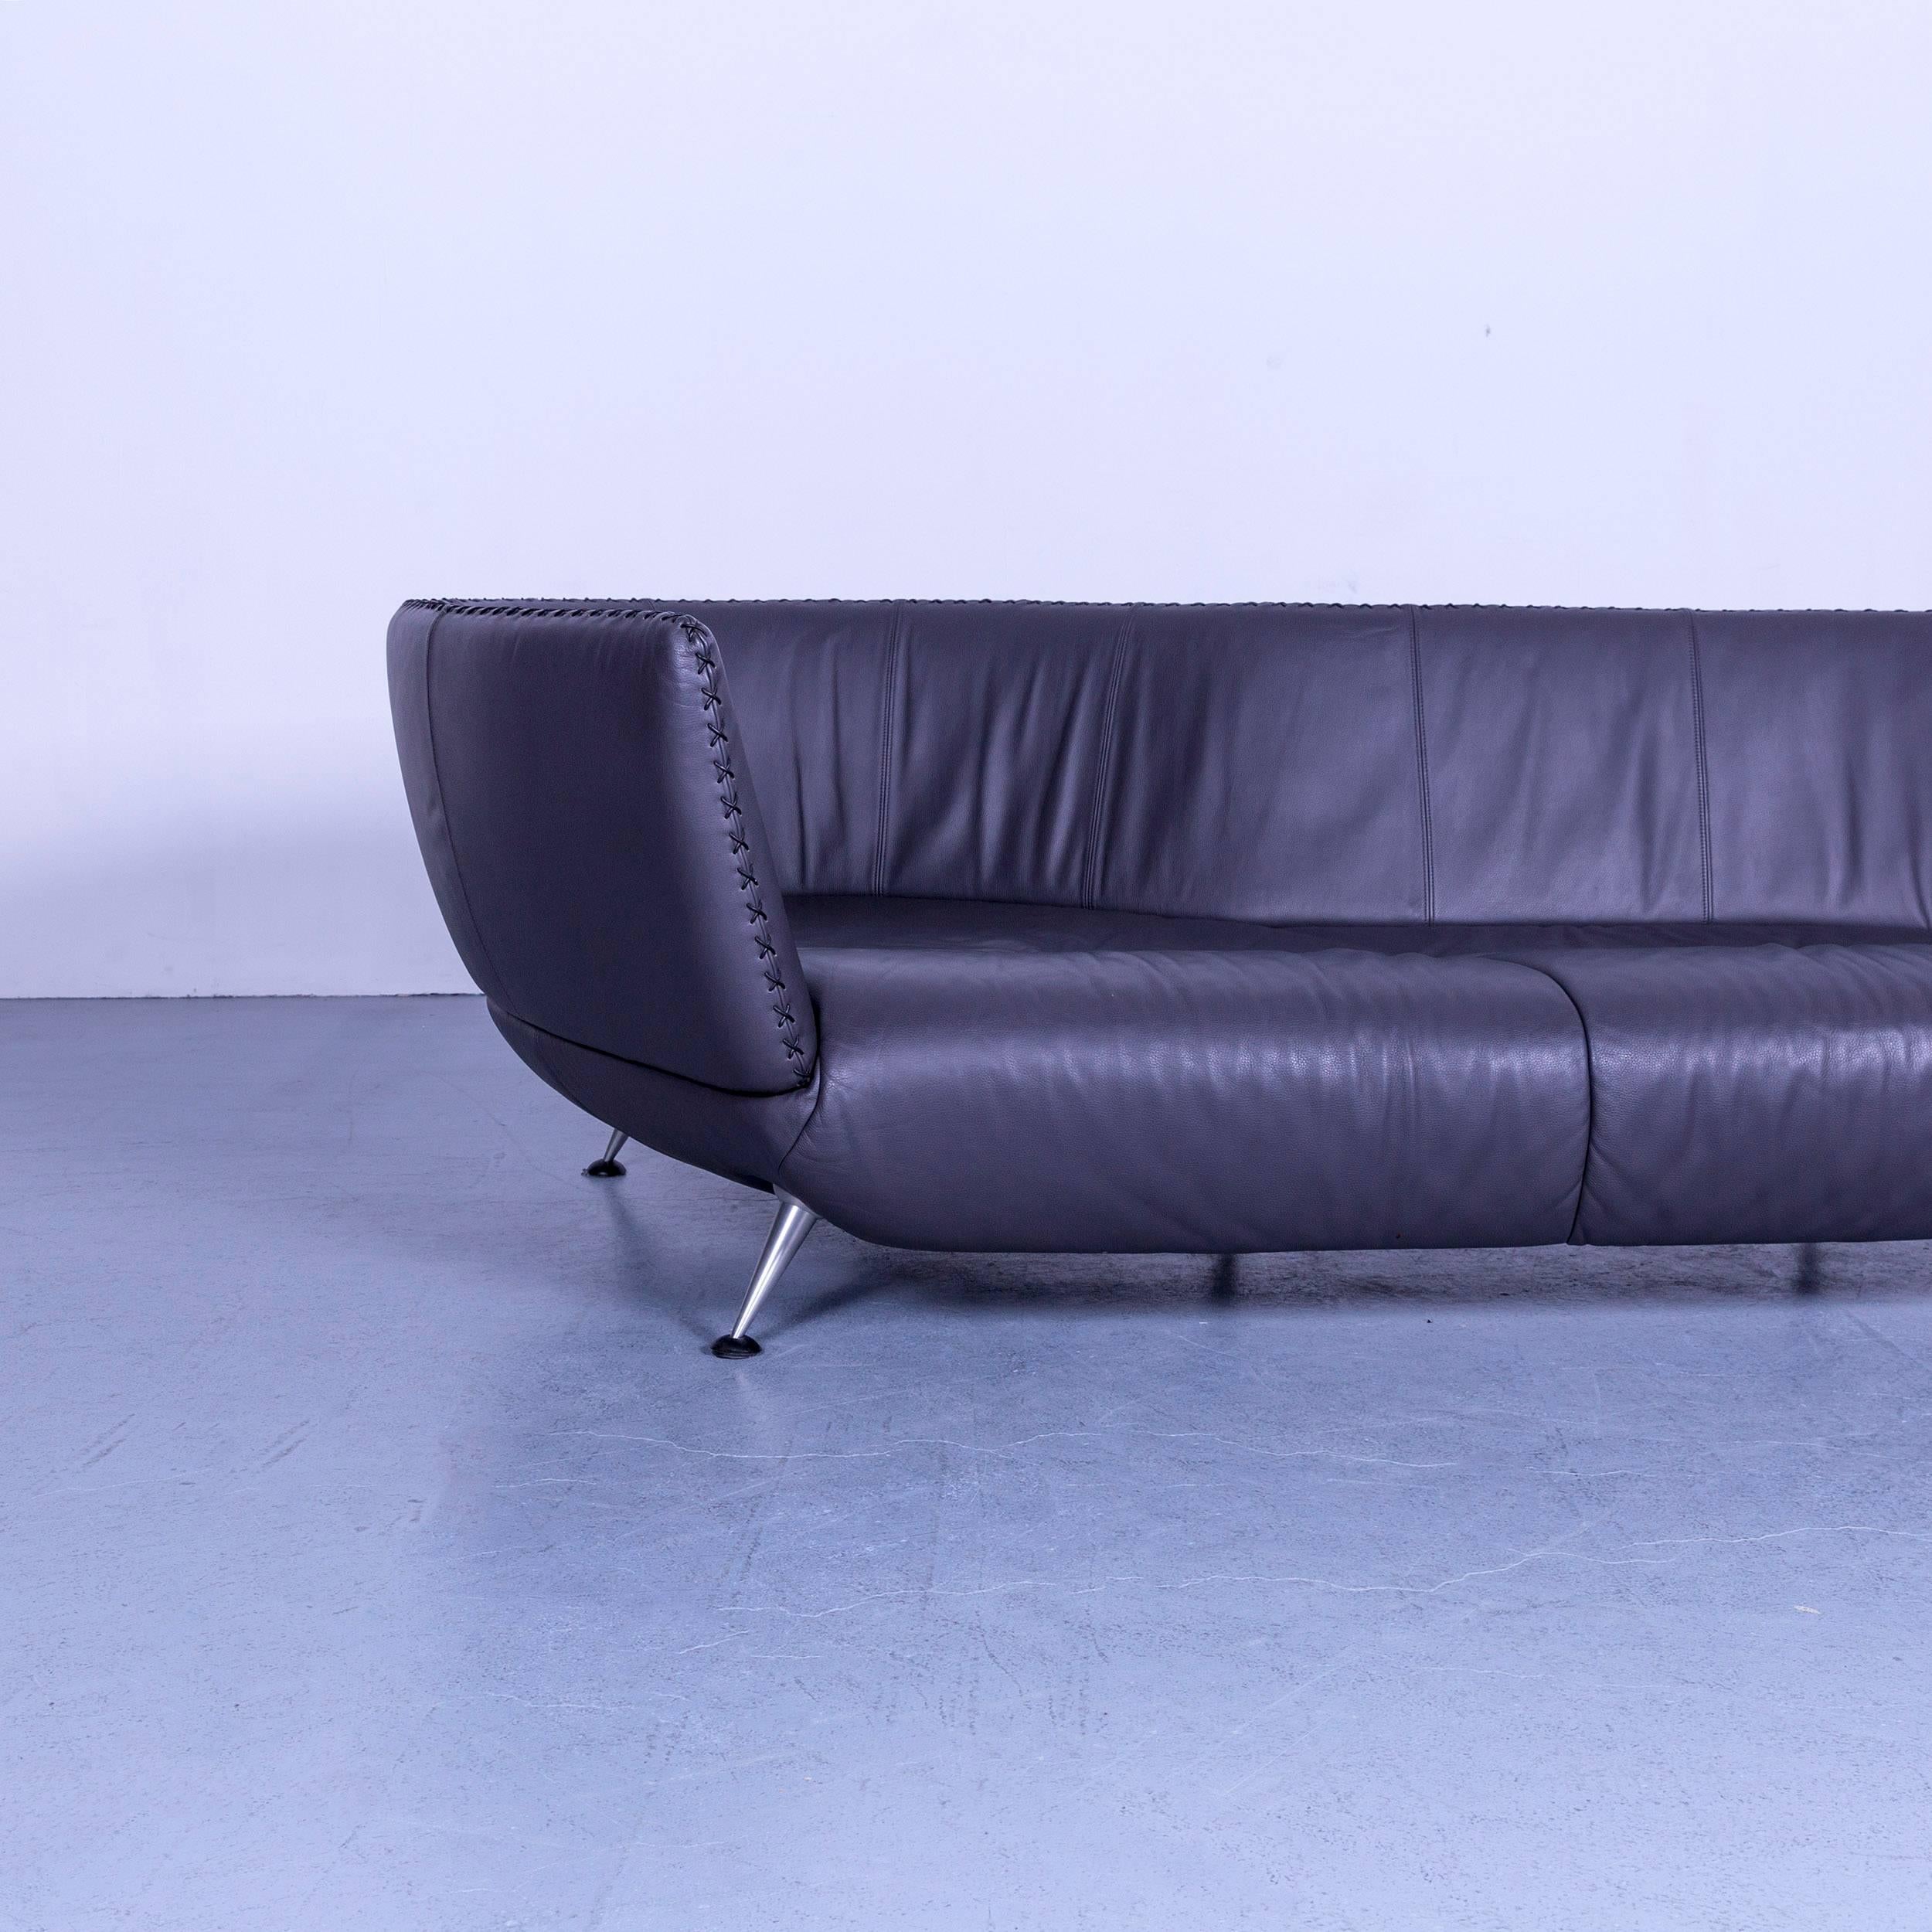 We offer delivery options to most destinations on earth. Find our shipping quotes at the bottom of this page in the shipping section.

We bring to you an de Sede DS 102 leather sofa grey three-Seat couch











   